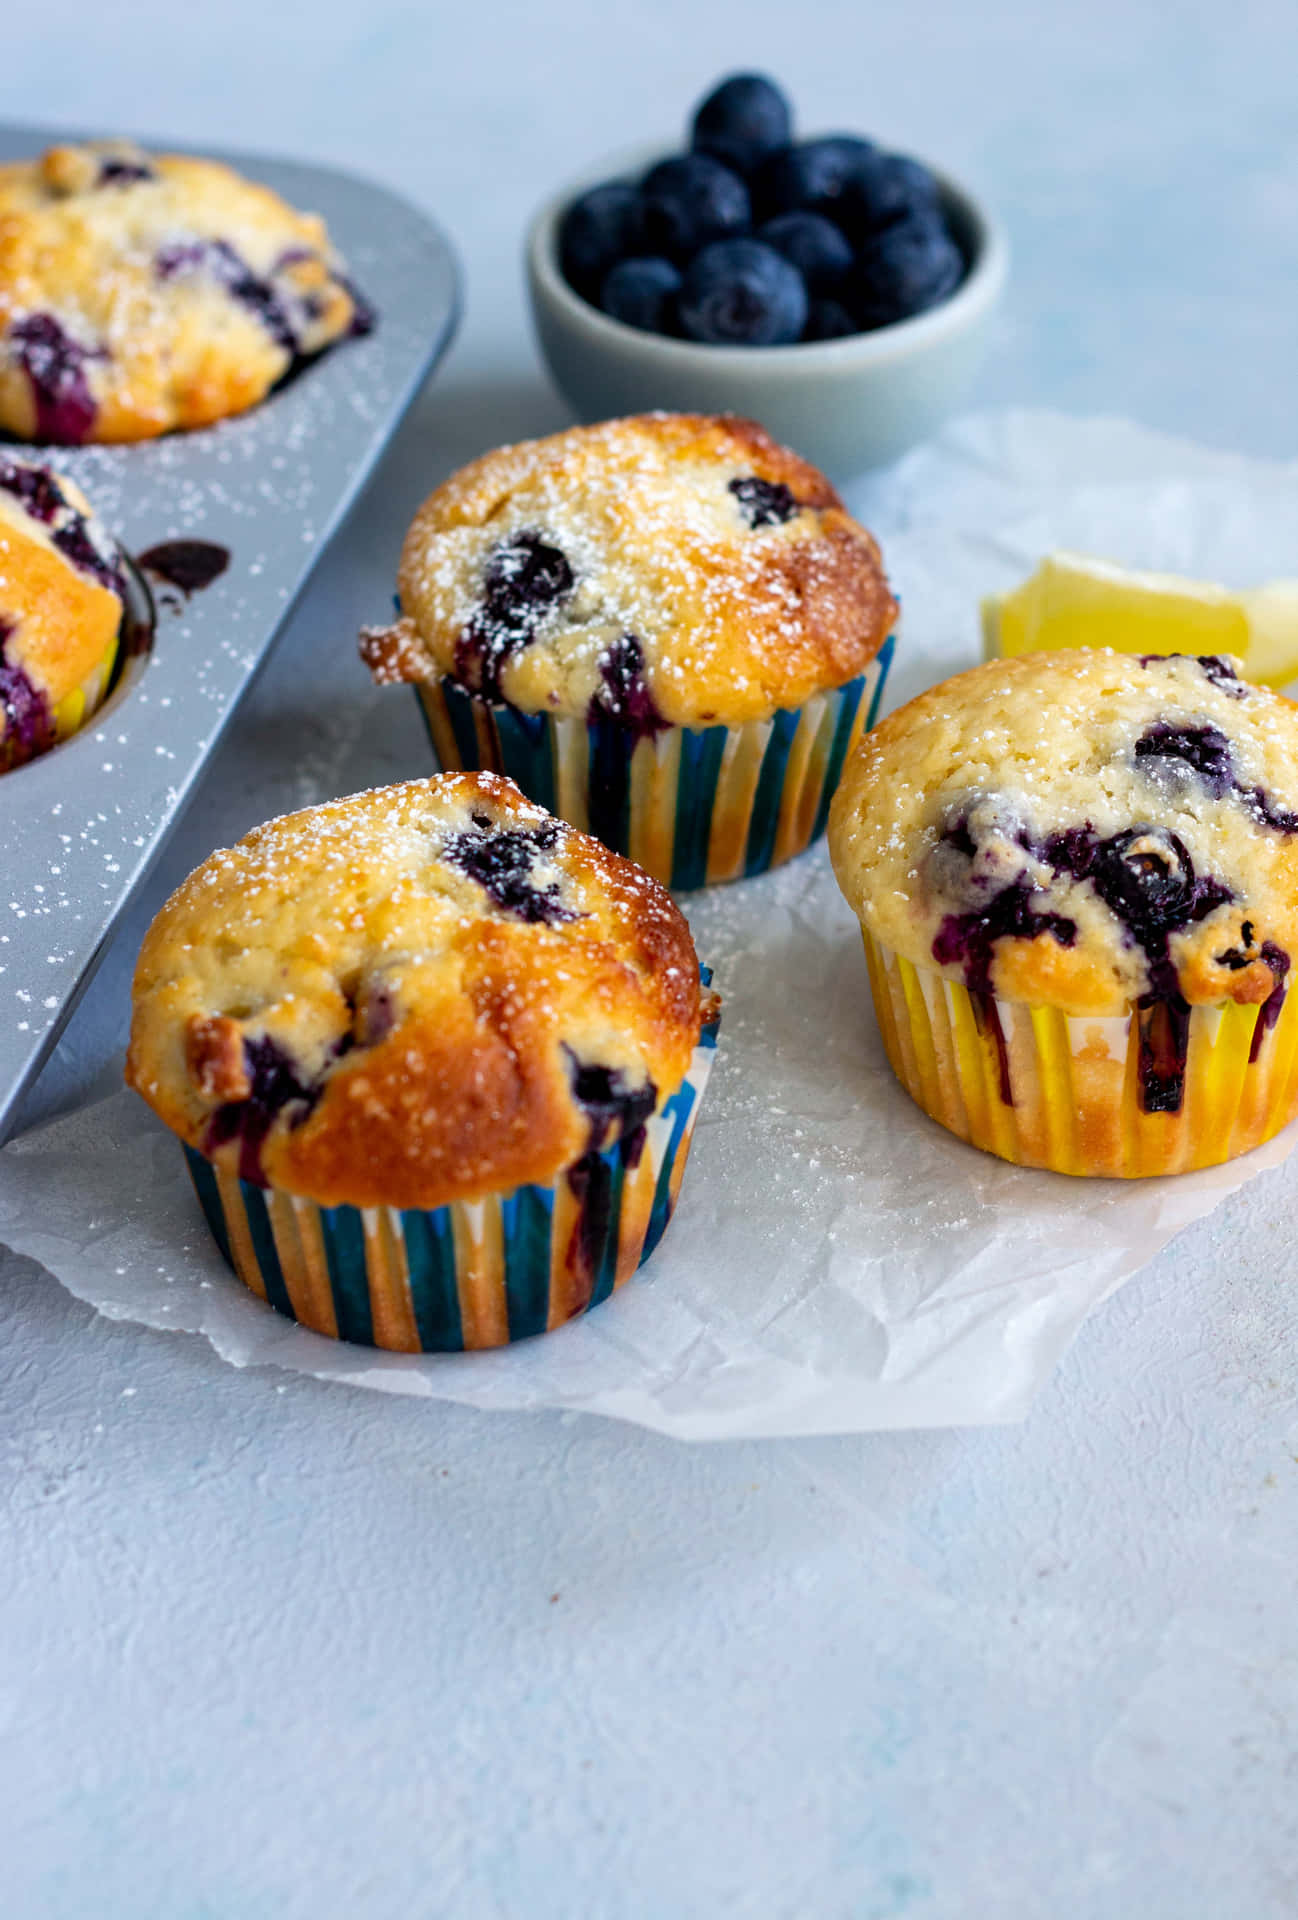 Enjoy a delicious handful of blueberry muffins! Wallpaper